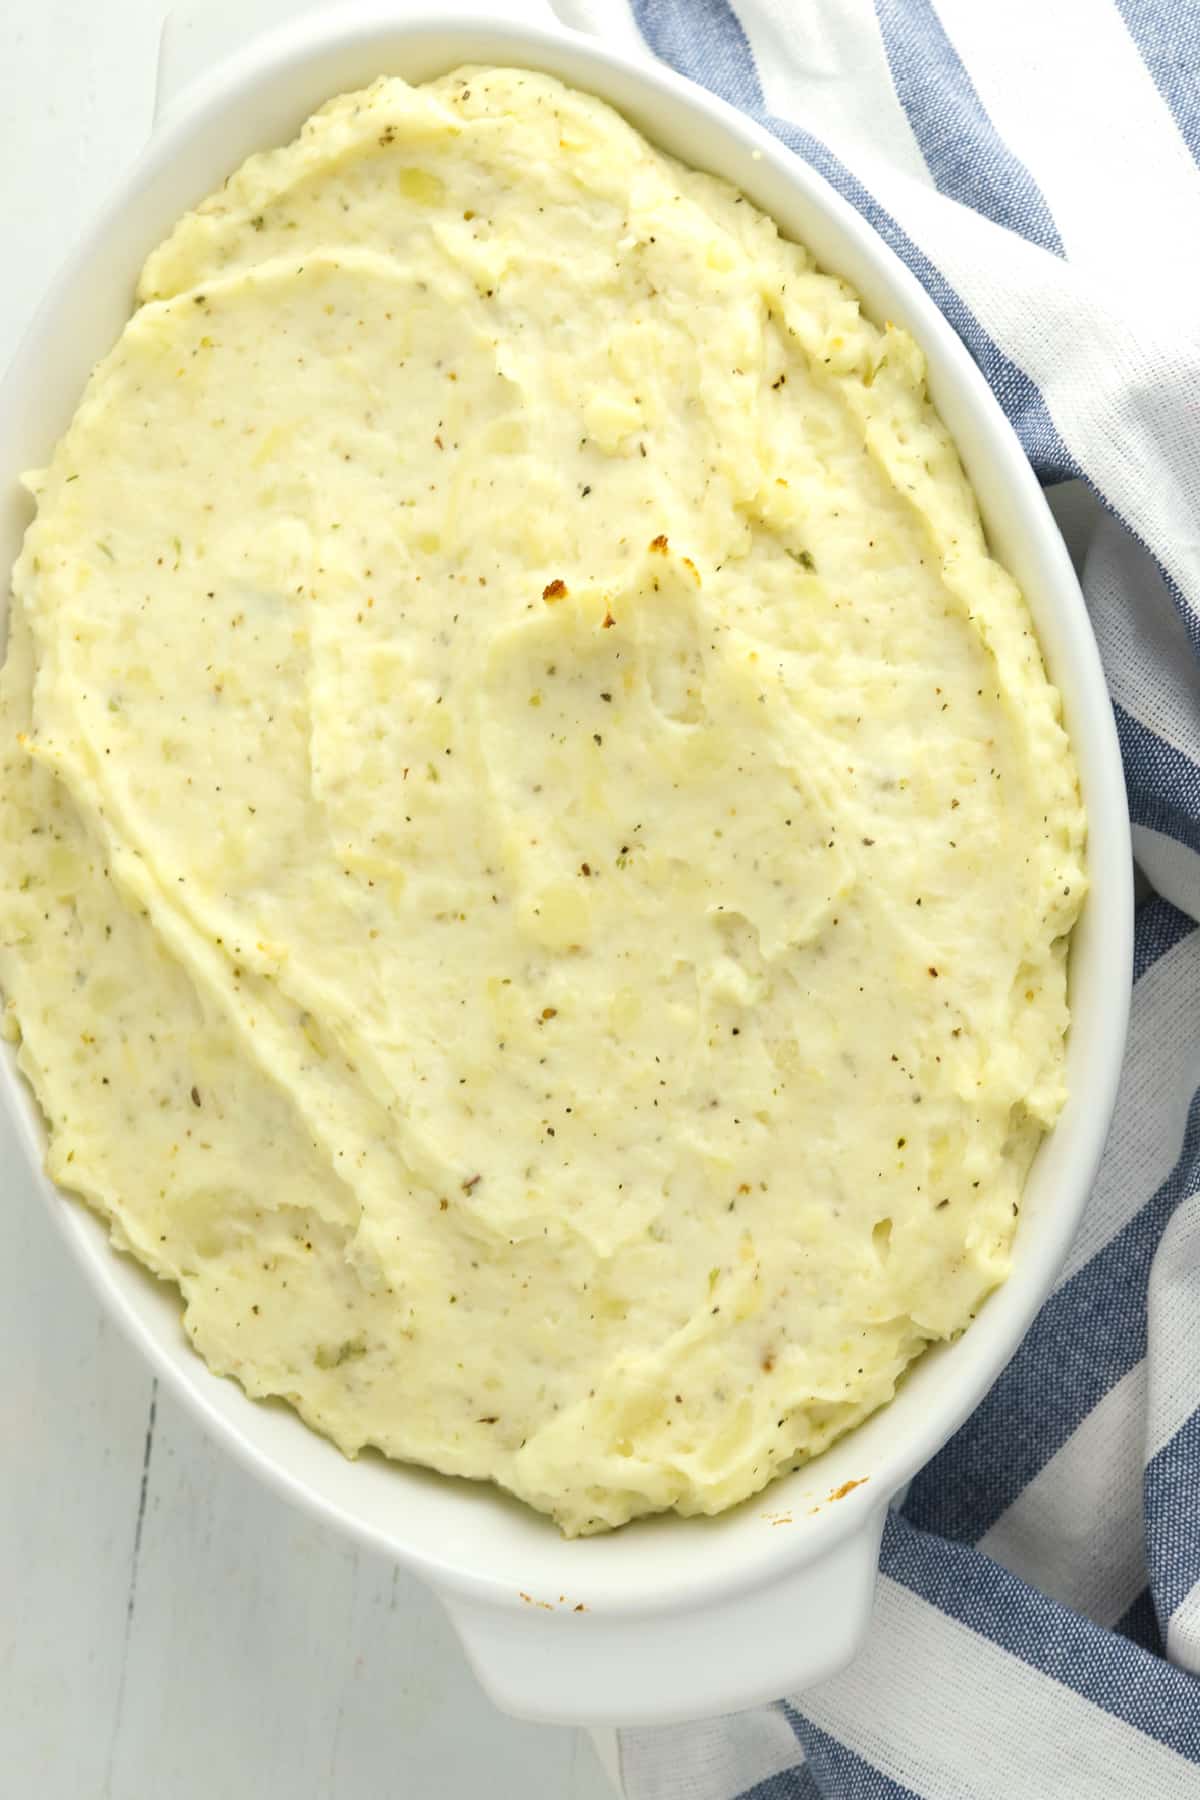 Mashed potatoes in a white casserole dish.